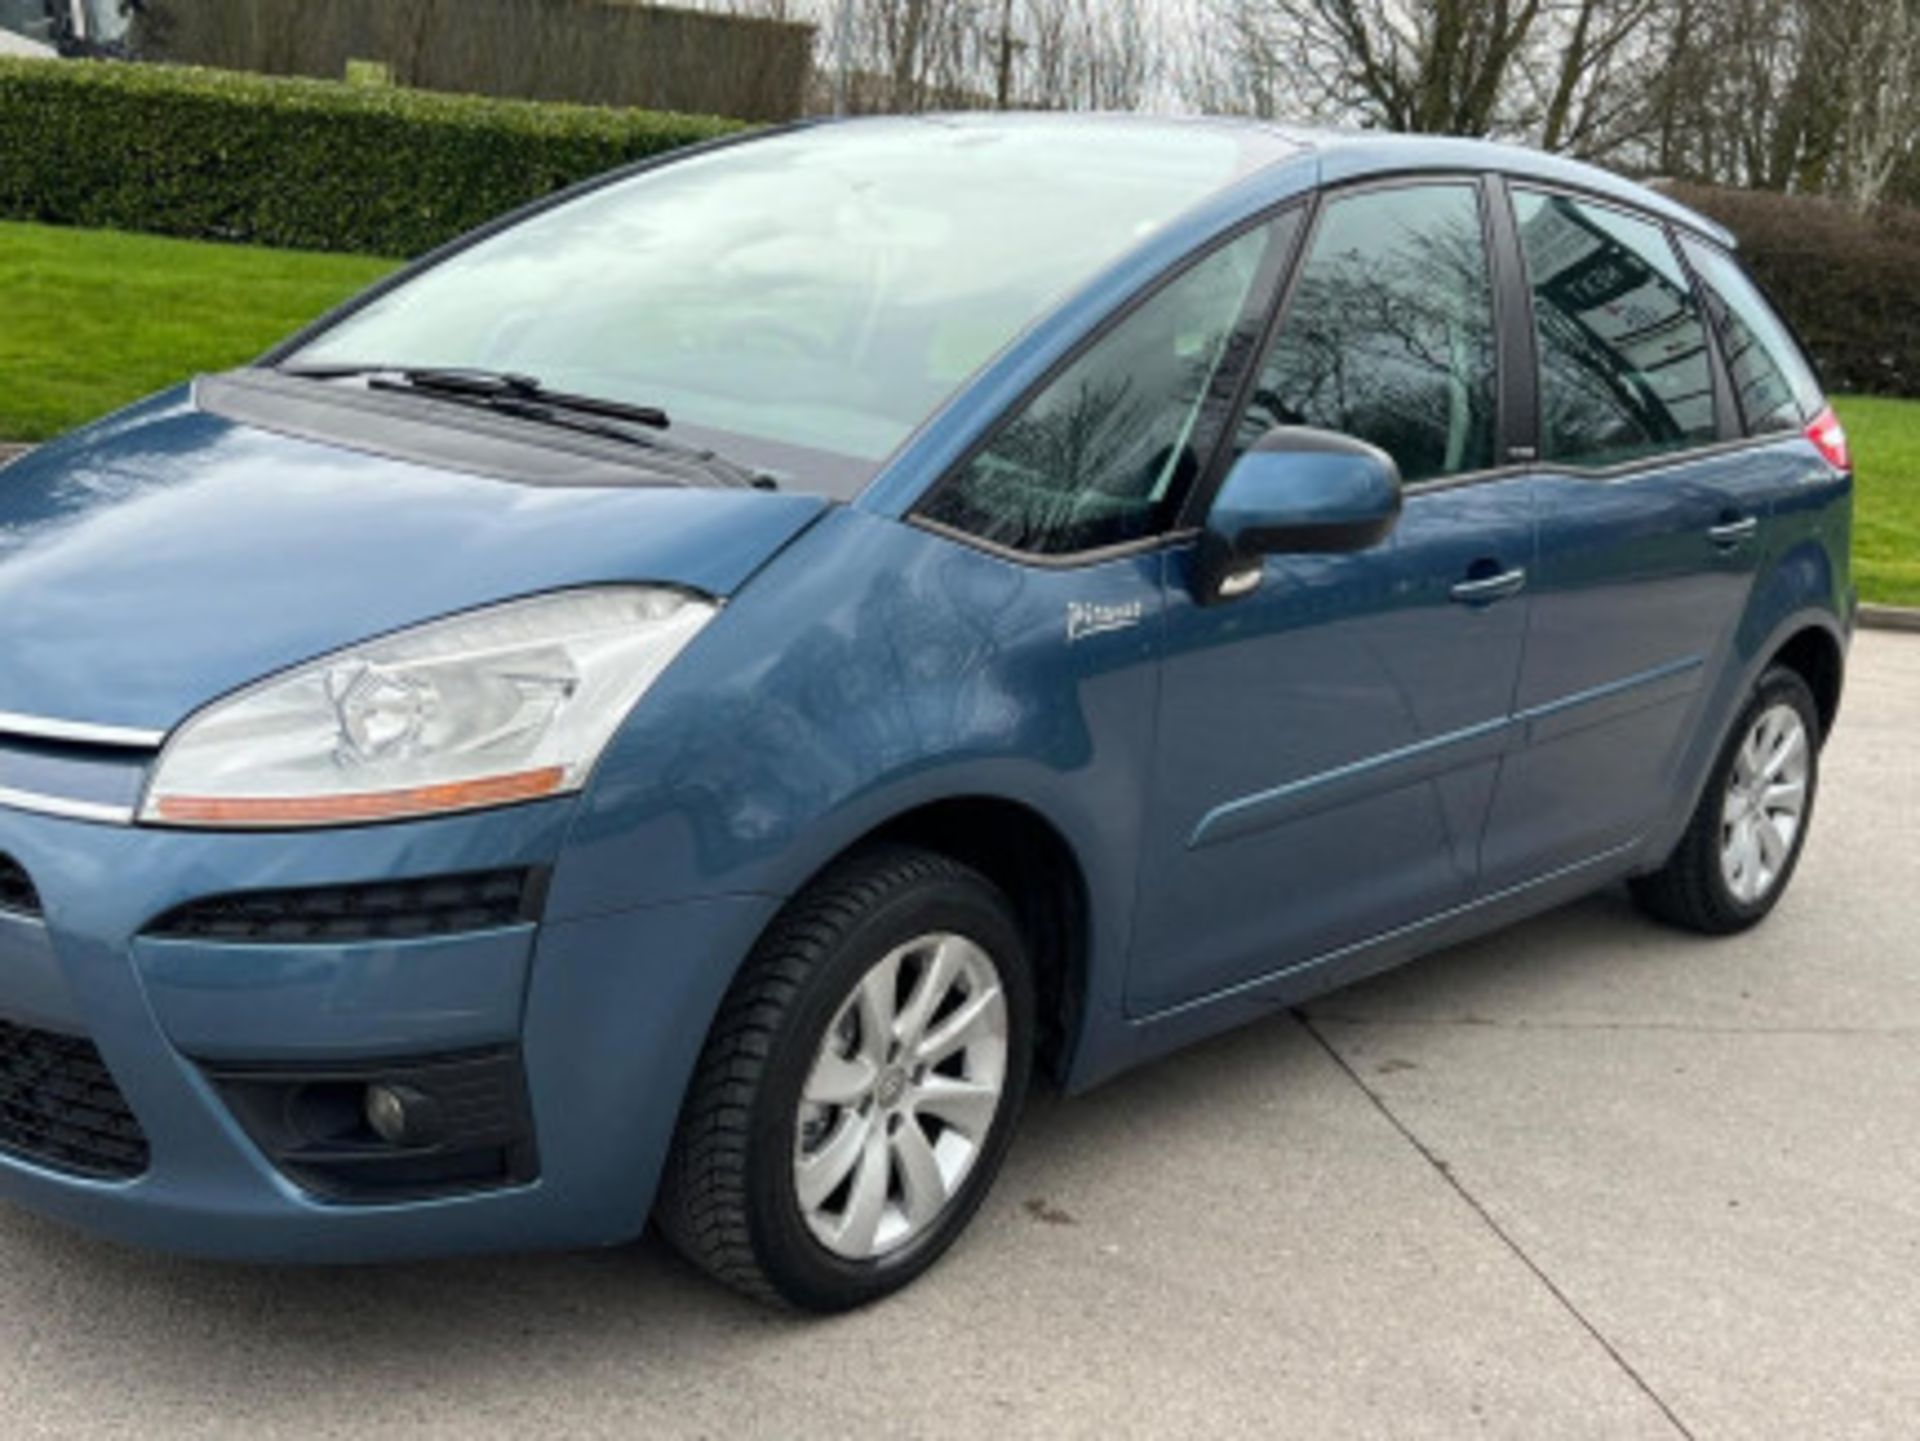 2009 CITROEN C4 PICASSO 1.6 HDI VTR+ EGS6 5DR >>--NO VAT ON HAMMER--<< - Image 39 of 123